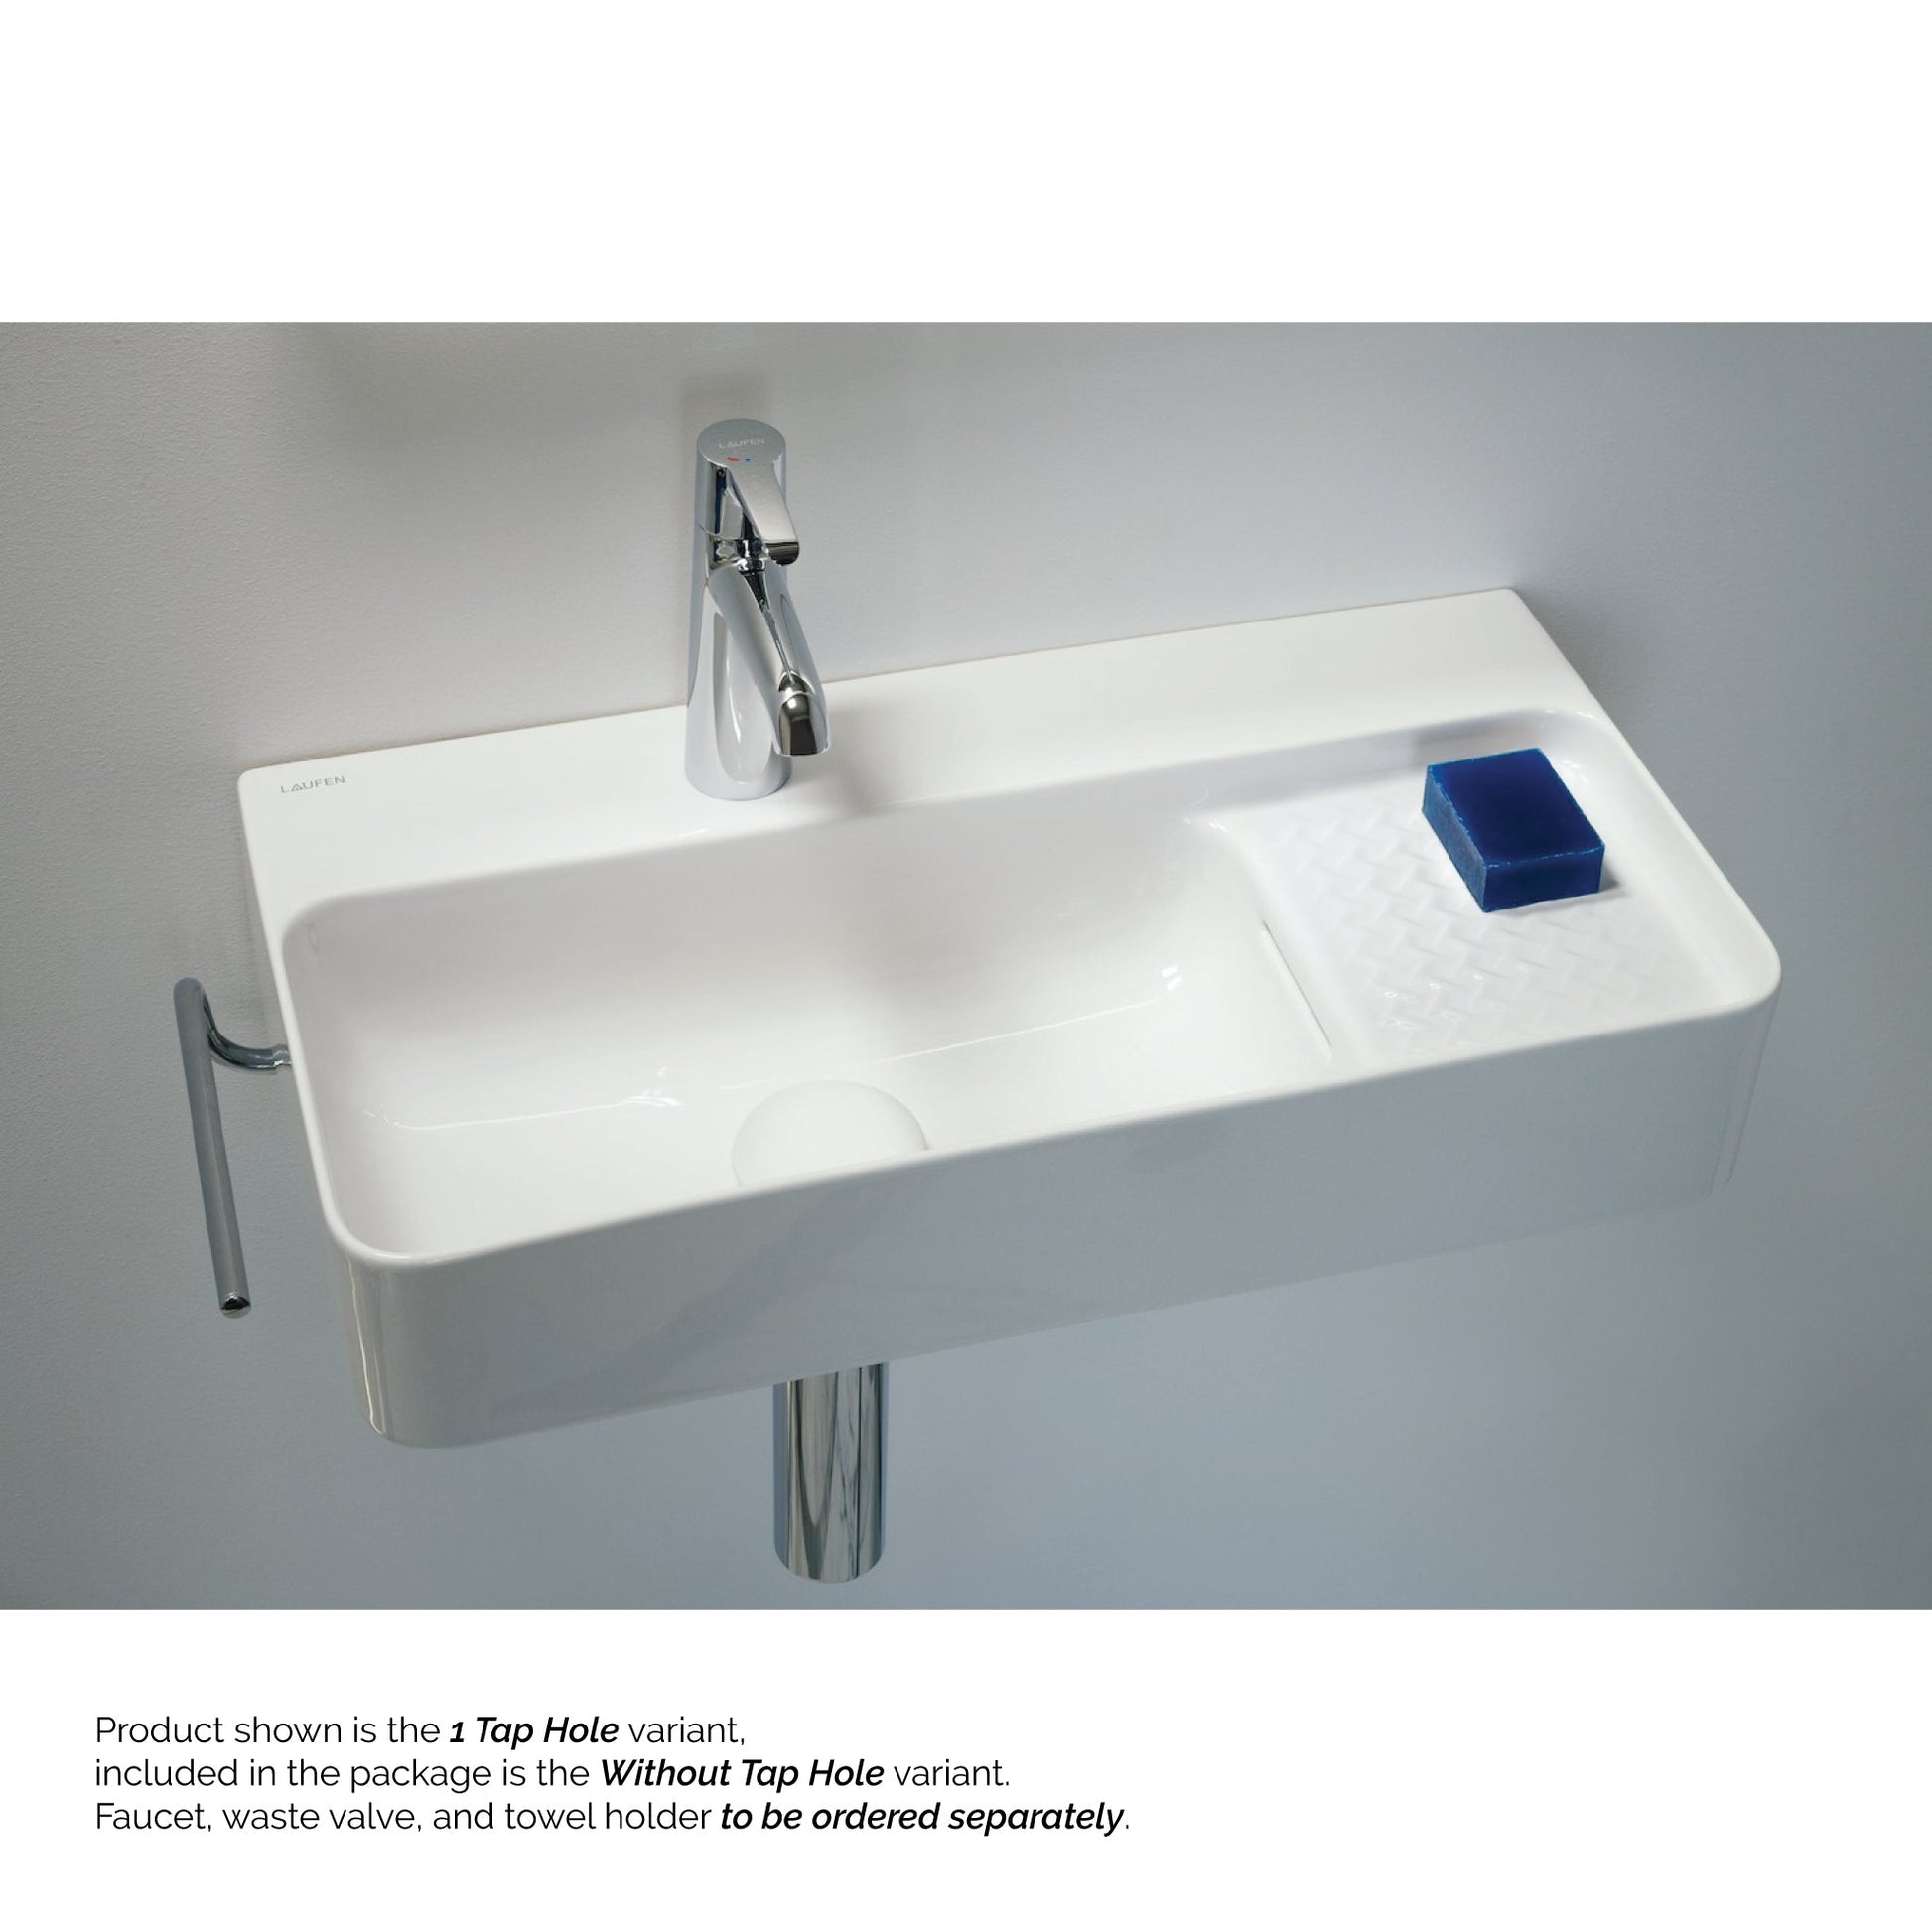 Laufen Val 24" x 12" Rectangular White Wall-Mounted Bathroom Sink Without Faucet Hole